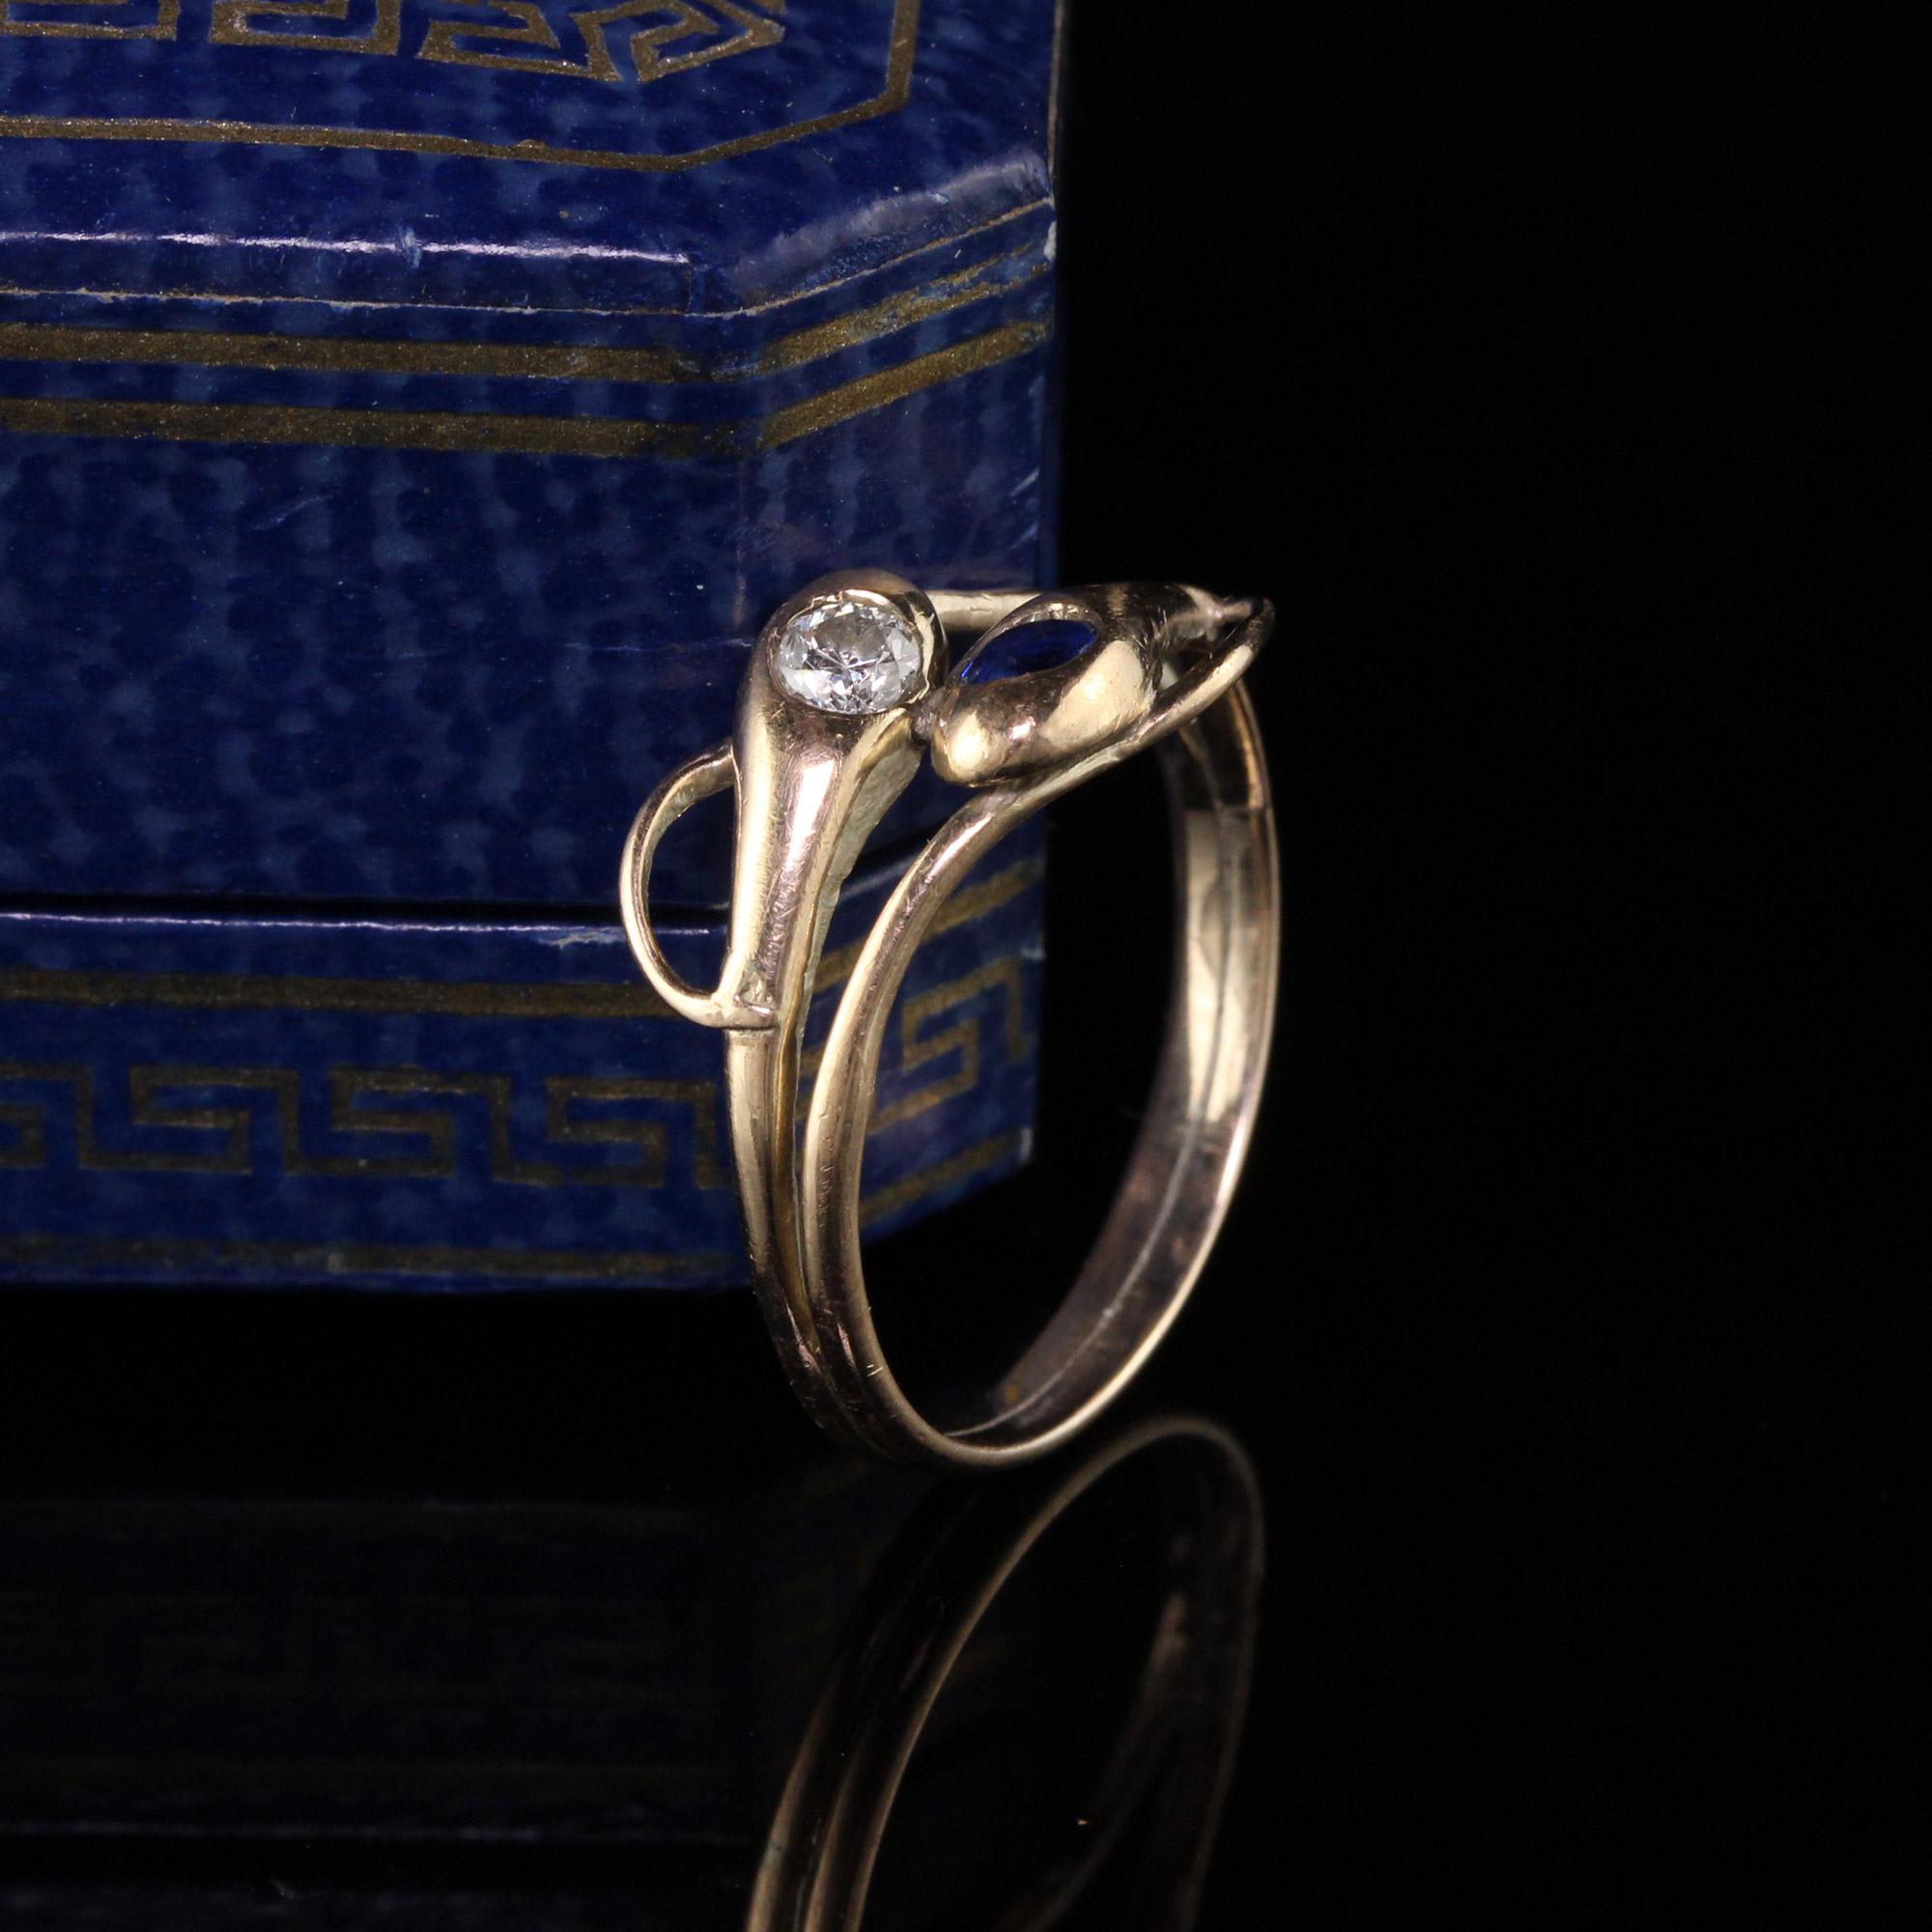 Beautiful Antique Victorian 12K Yellow Gold Diamond and Sapphire Double Snake Ring. This ring features and old european cut diamond and an old cut sapphire in the head of the snakes. It is handcrafted and sits comfortably on the finger.

Item